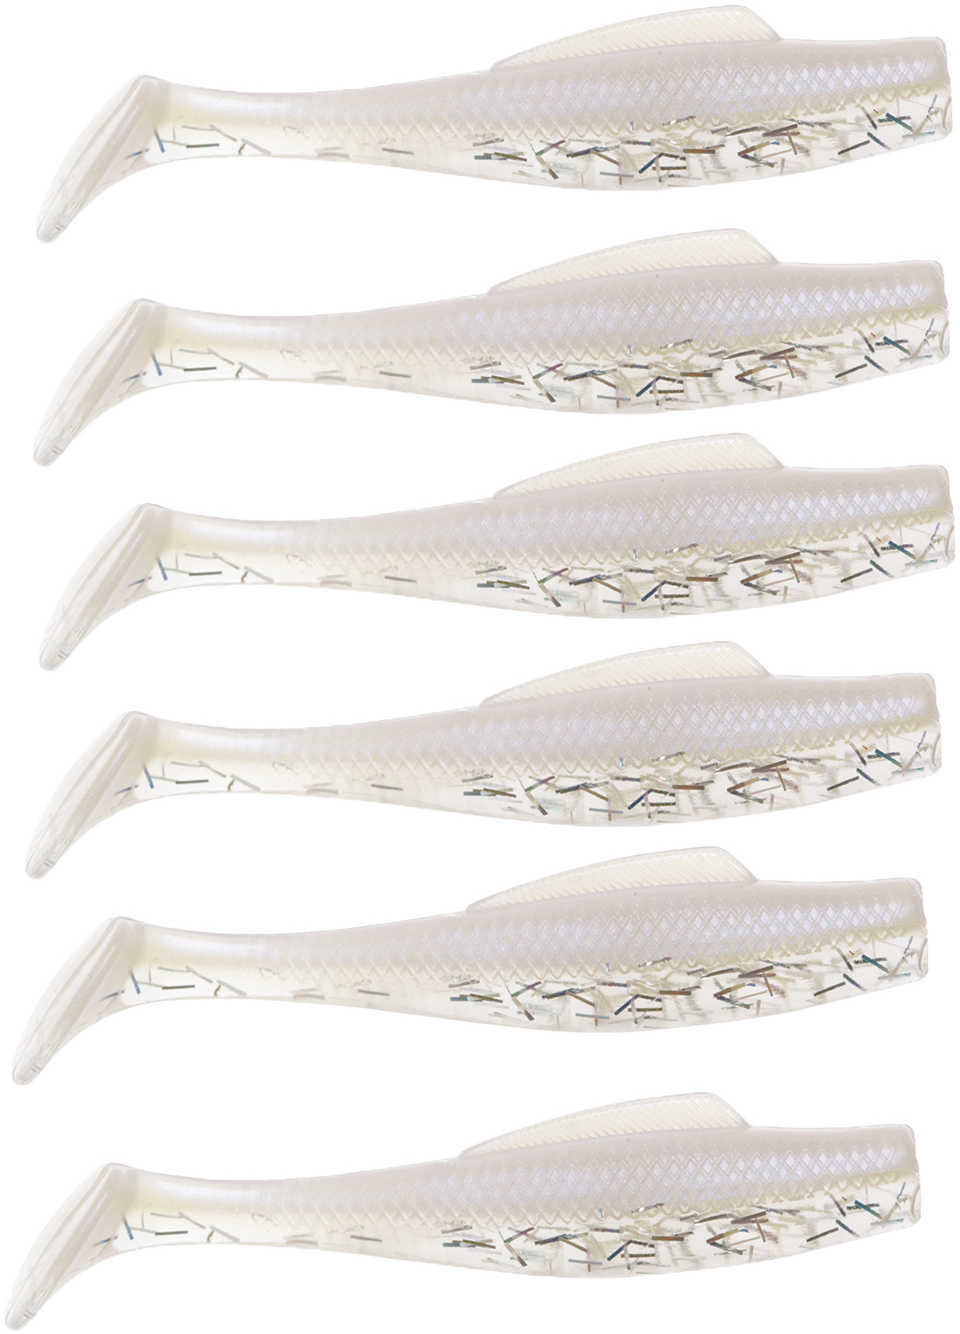 Z-Man Minniowz Soft Plastic Lures 3" Length, Opening Night, Package of 6